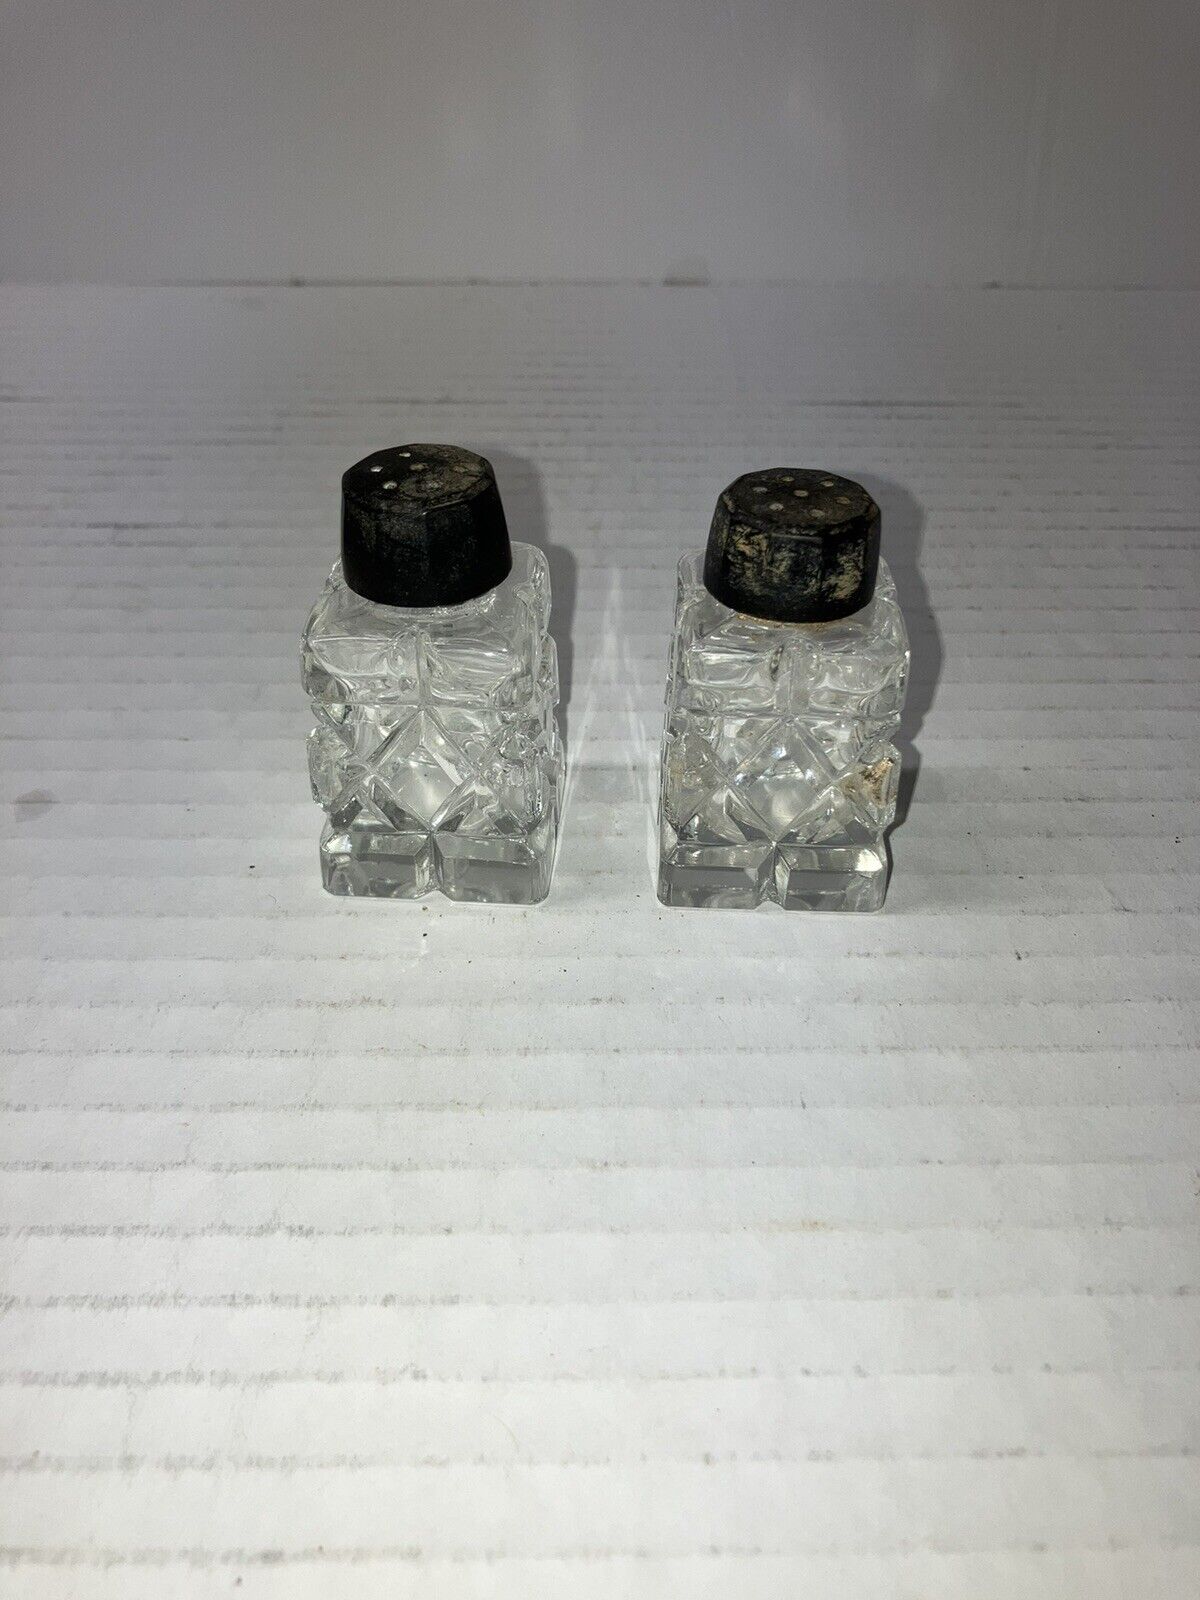 Vintage 70s Square Crystal Cube Salt and Pepper Shakers